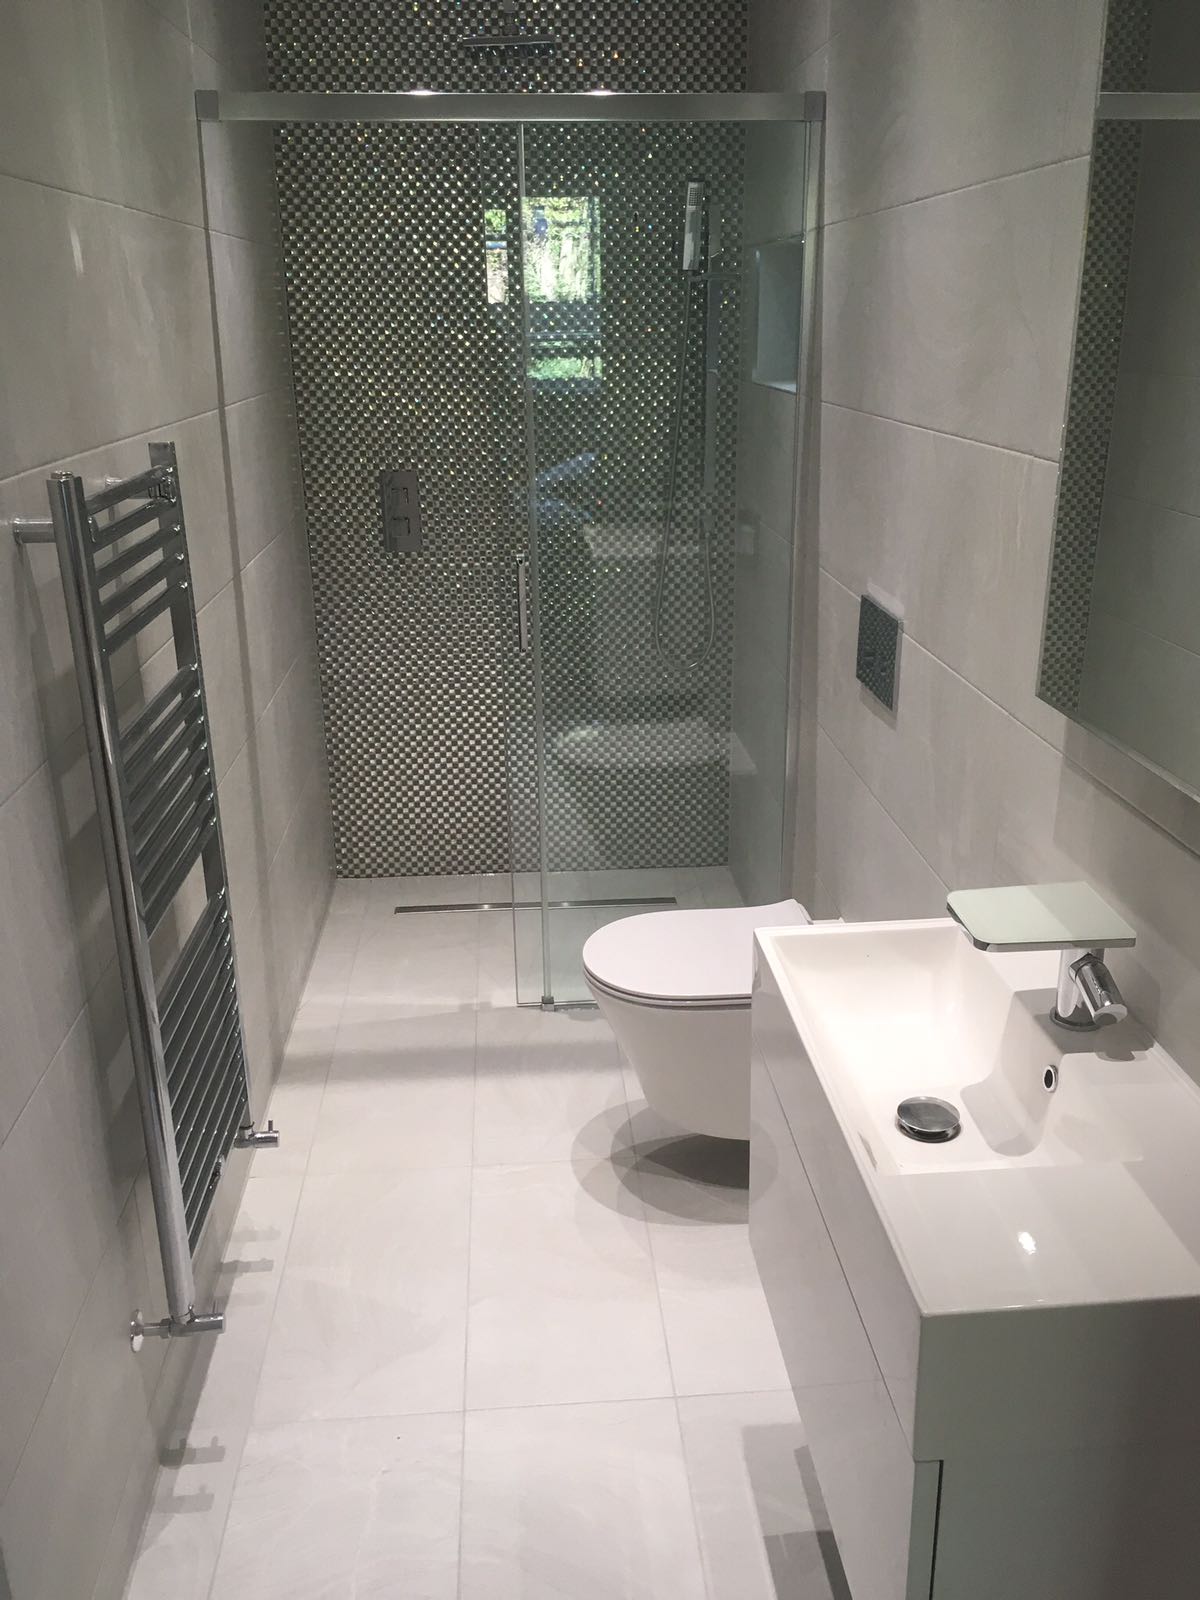 Luxury bathrooms at affordable prices in Loughton, Essex